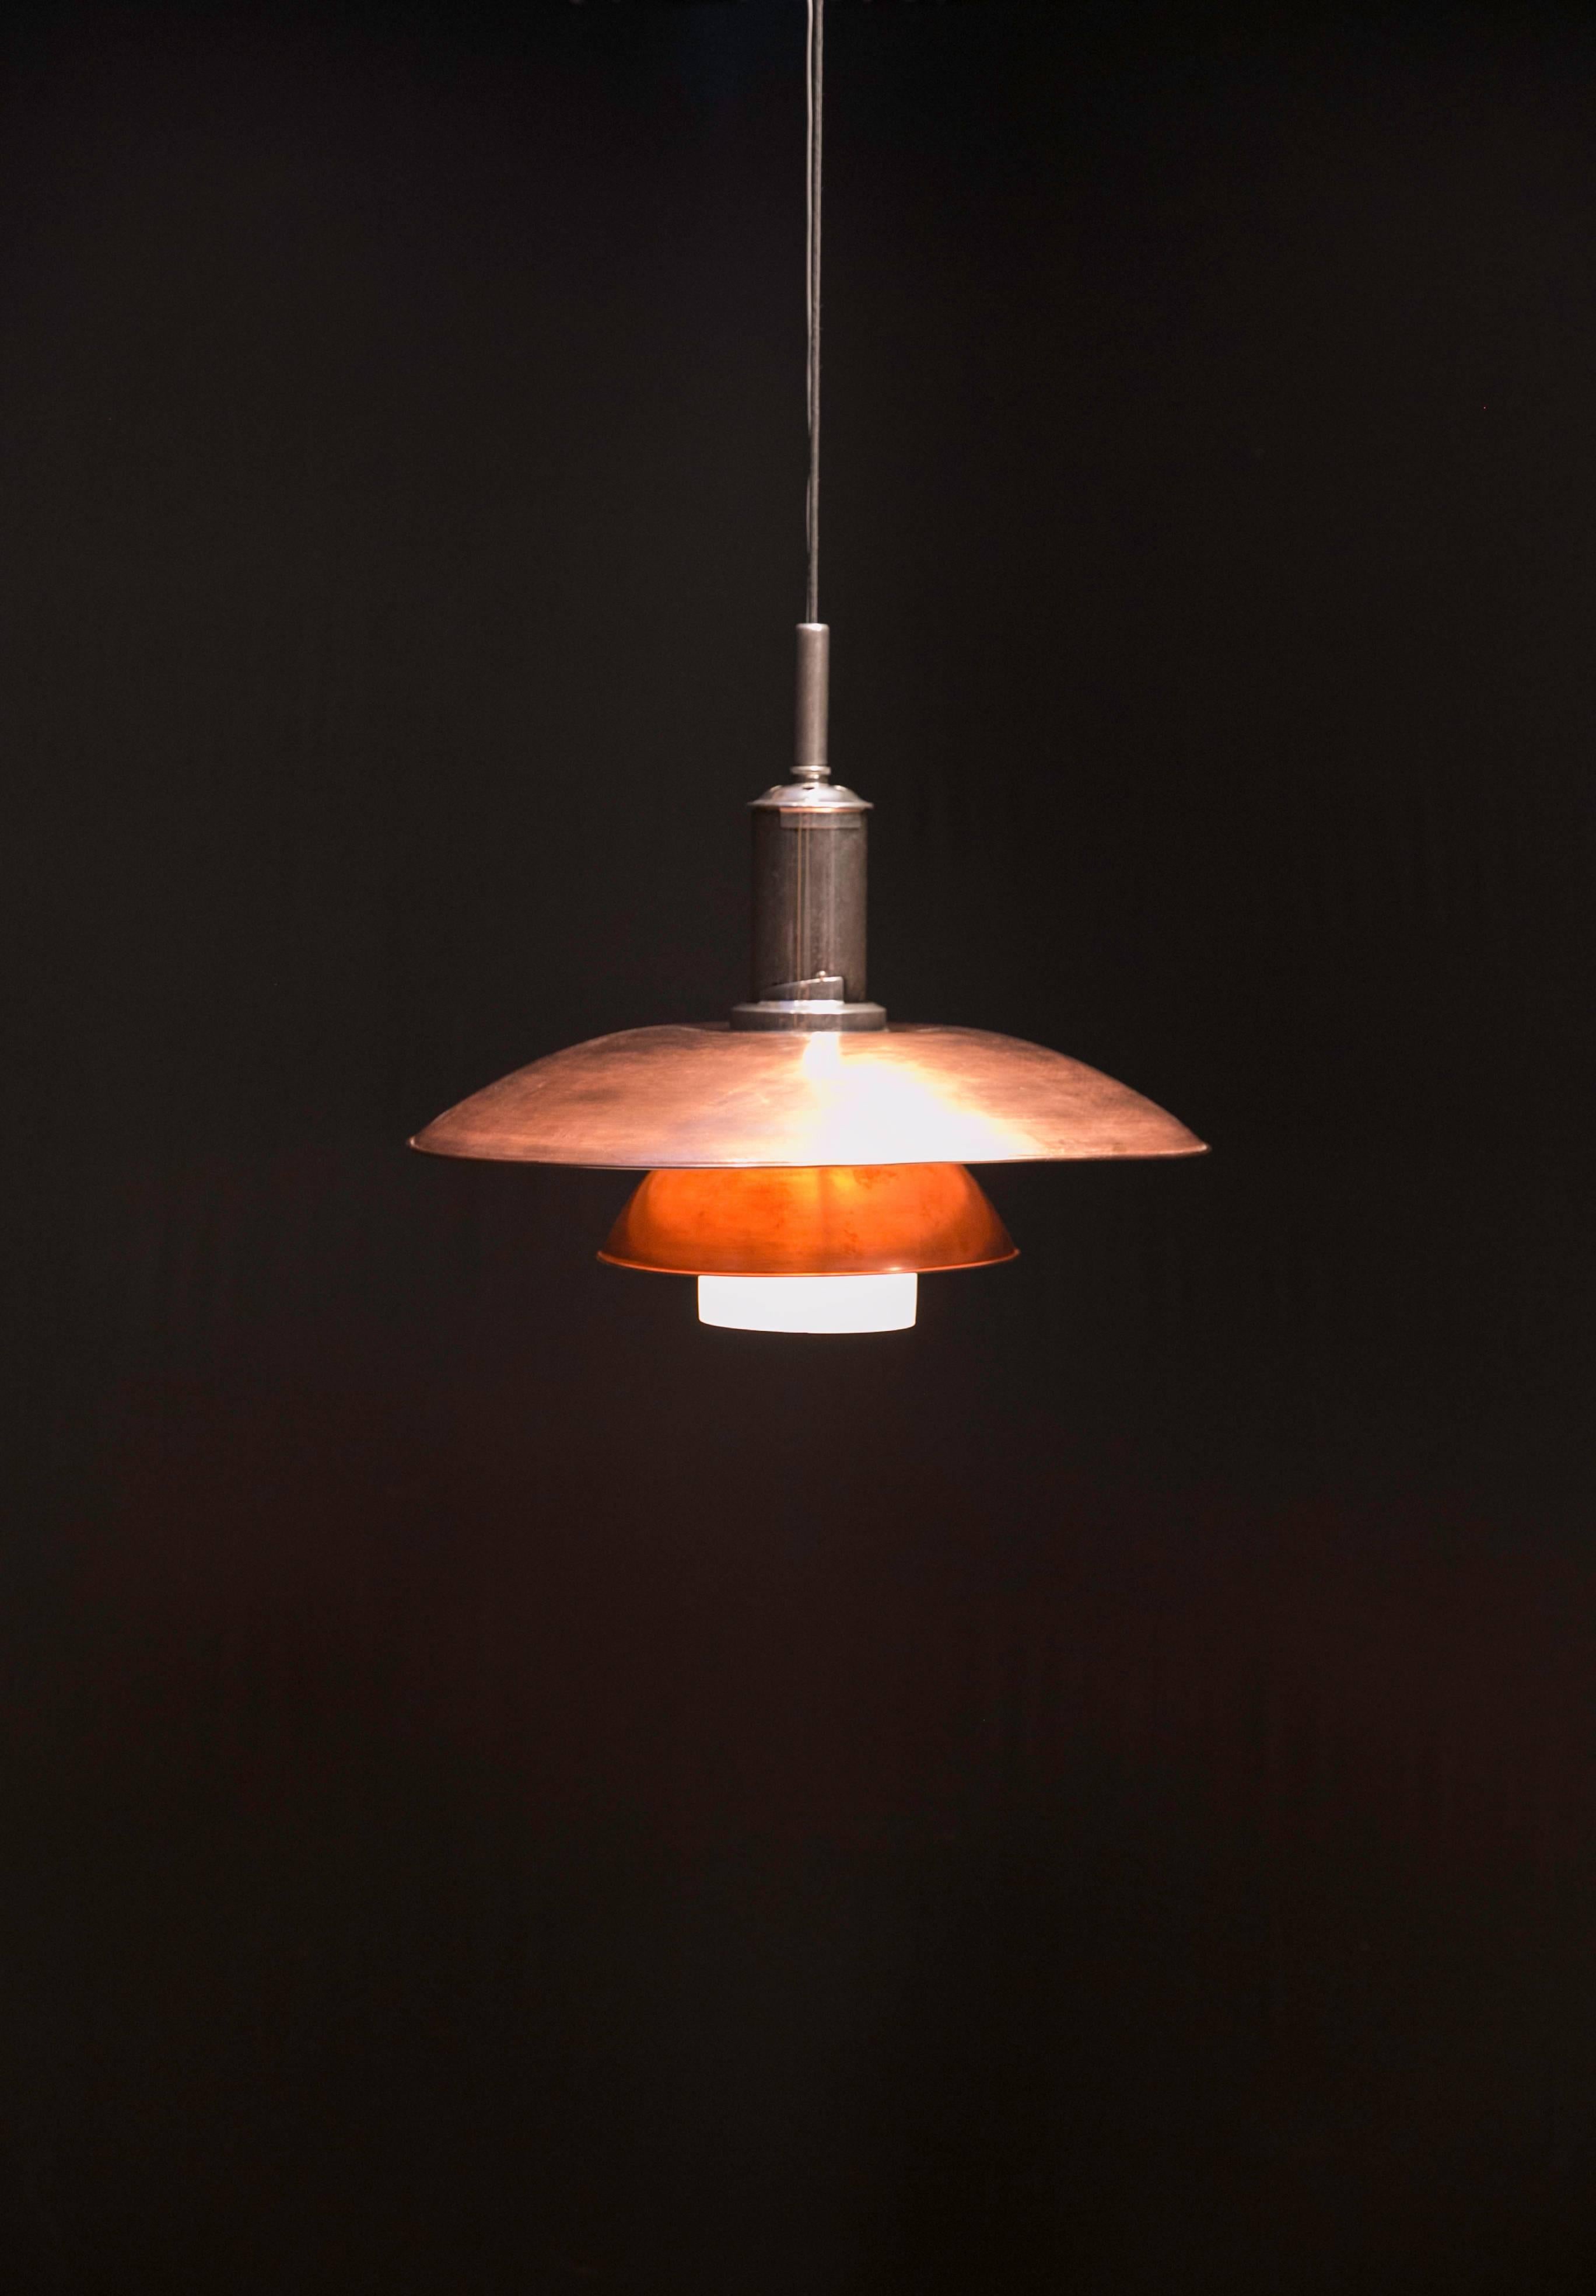 This rare and large pendant lamp was designed and made by Poul Henningsen, circa 1929. Marked with the model number and patented on the nickel shade holder. The top and middle shades are of patenated copper. The lower shade and bowl are of matte